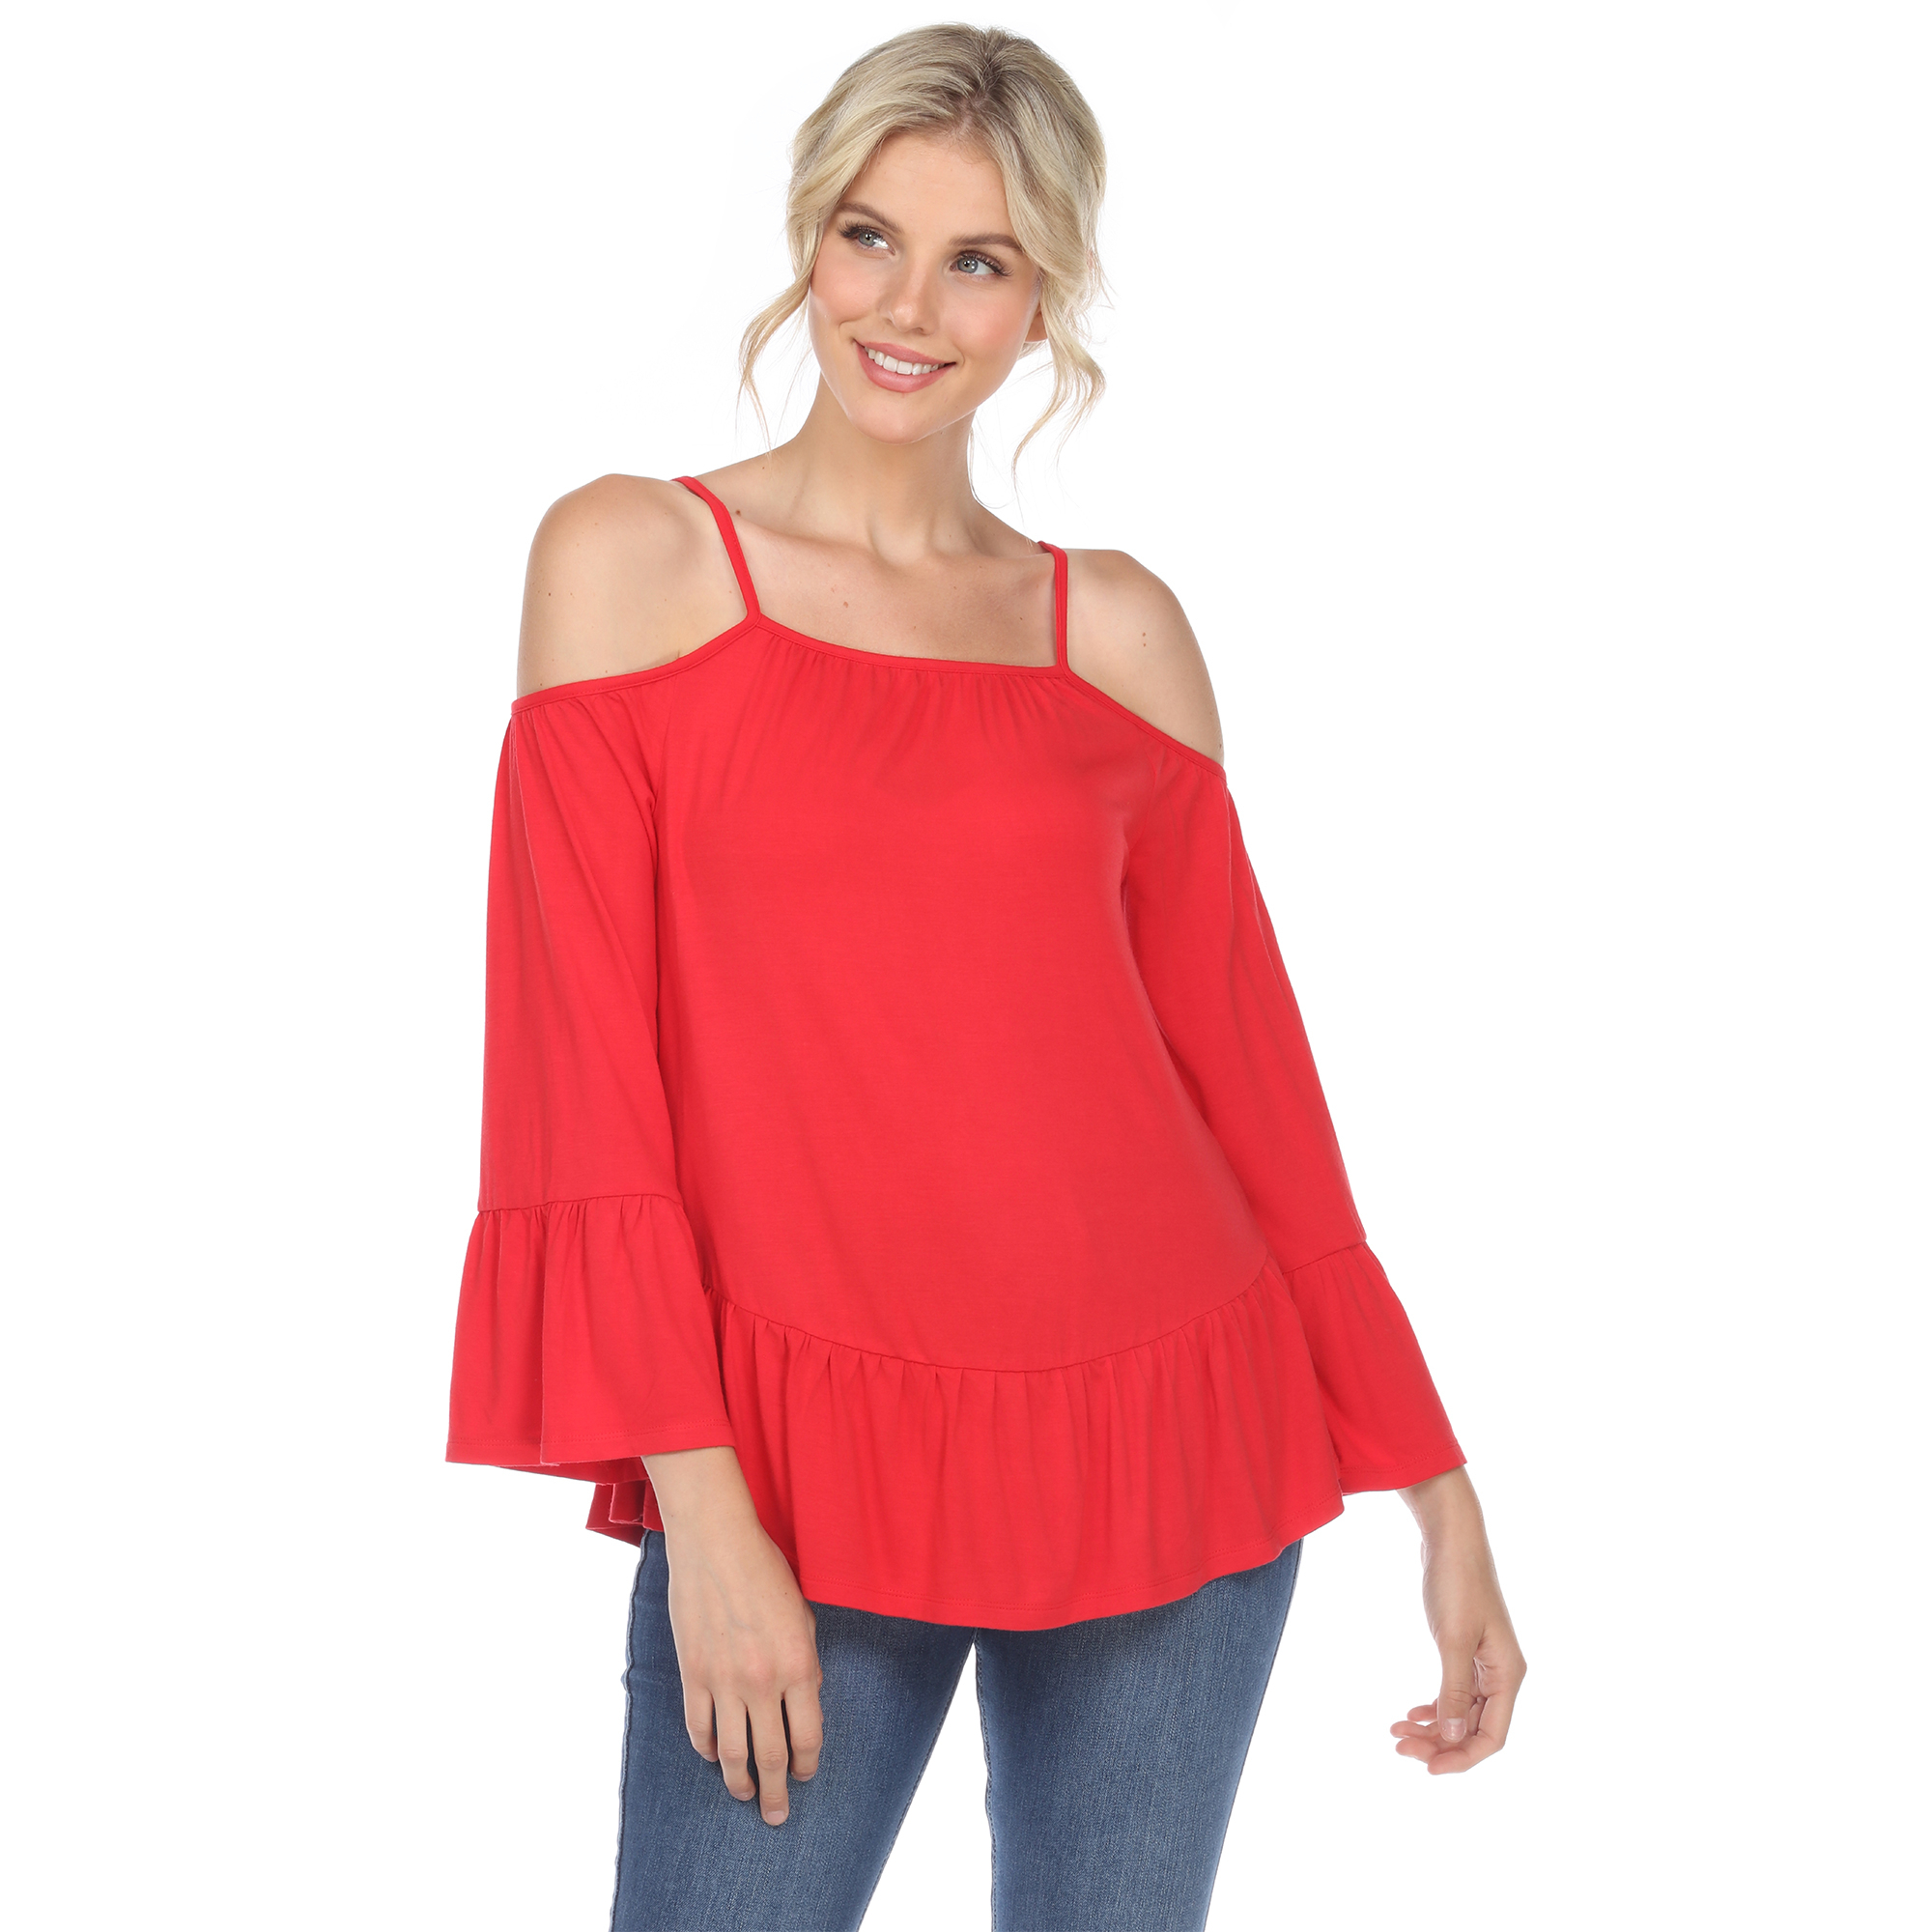 White Mark Women's Cold Shoulder Ruffle Sleeve Top - Red, Large